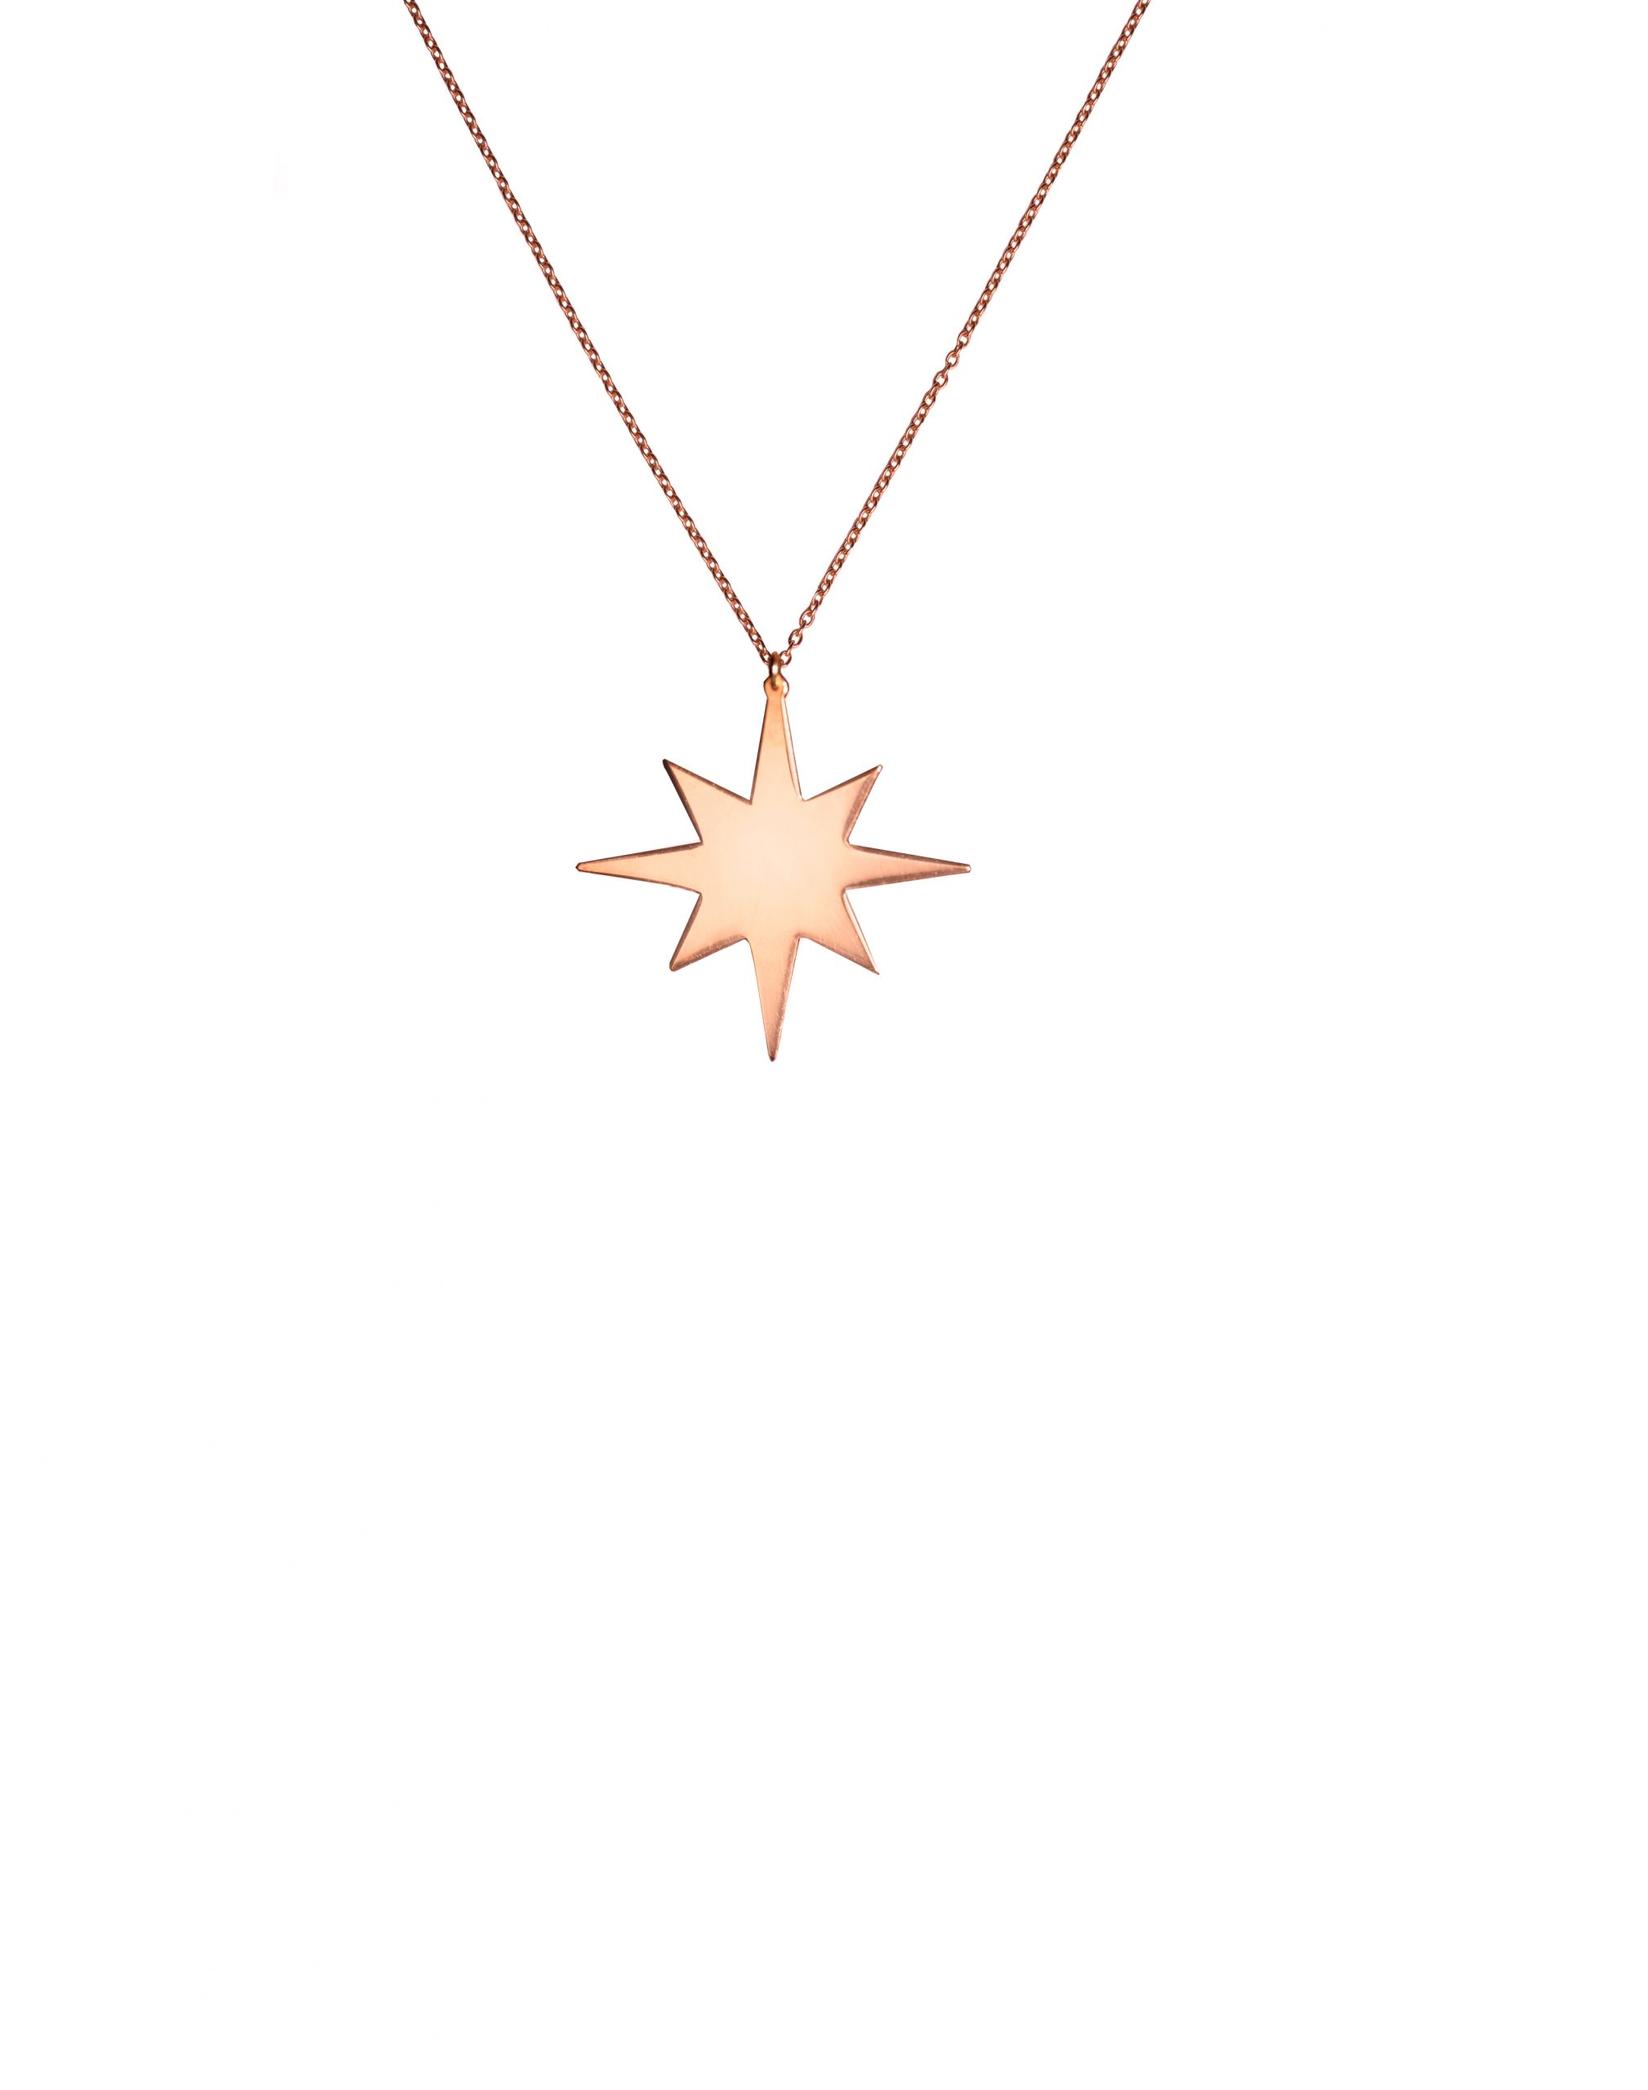 Selected image for WISH Ogrlica od rose gold pozlate North star